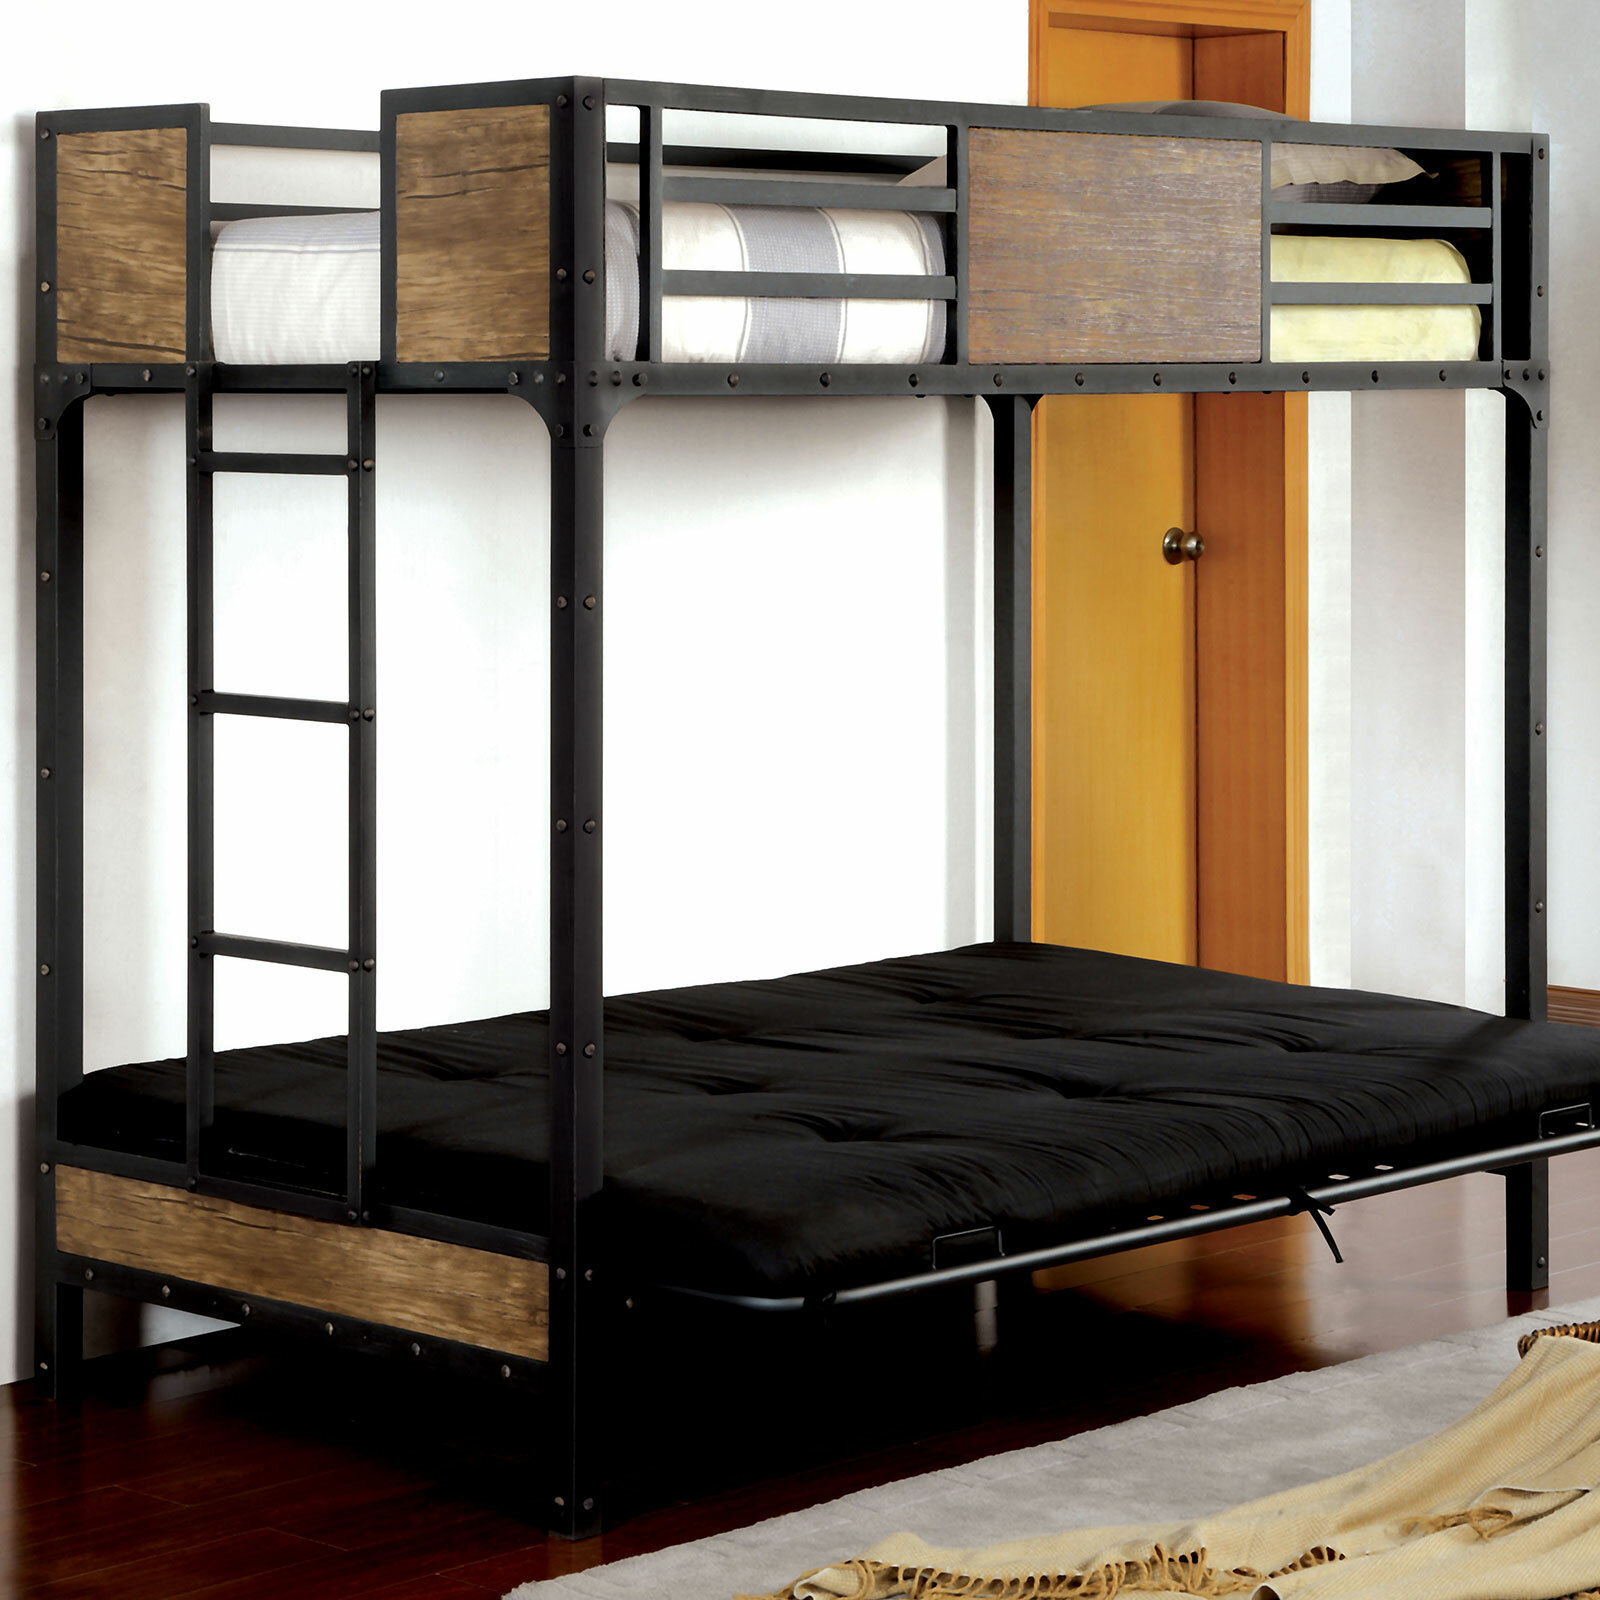 Full Over Futon Bunk Bed Visualhunt, Bunk Bed With Futon Below